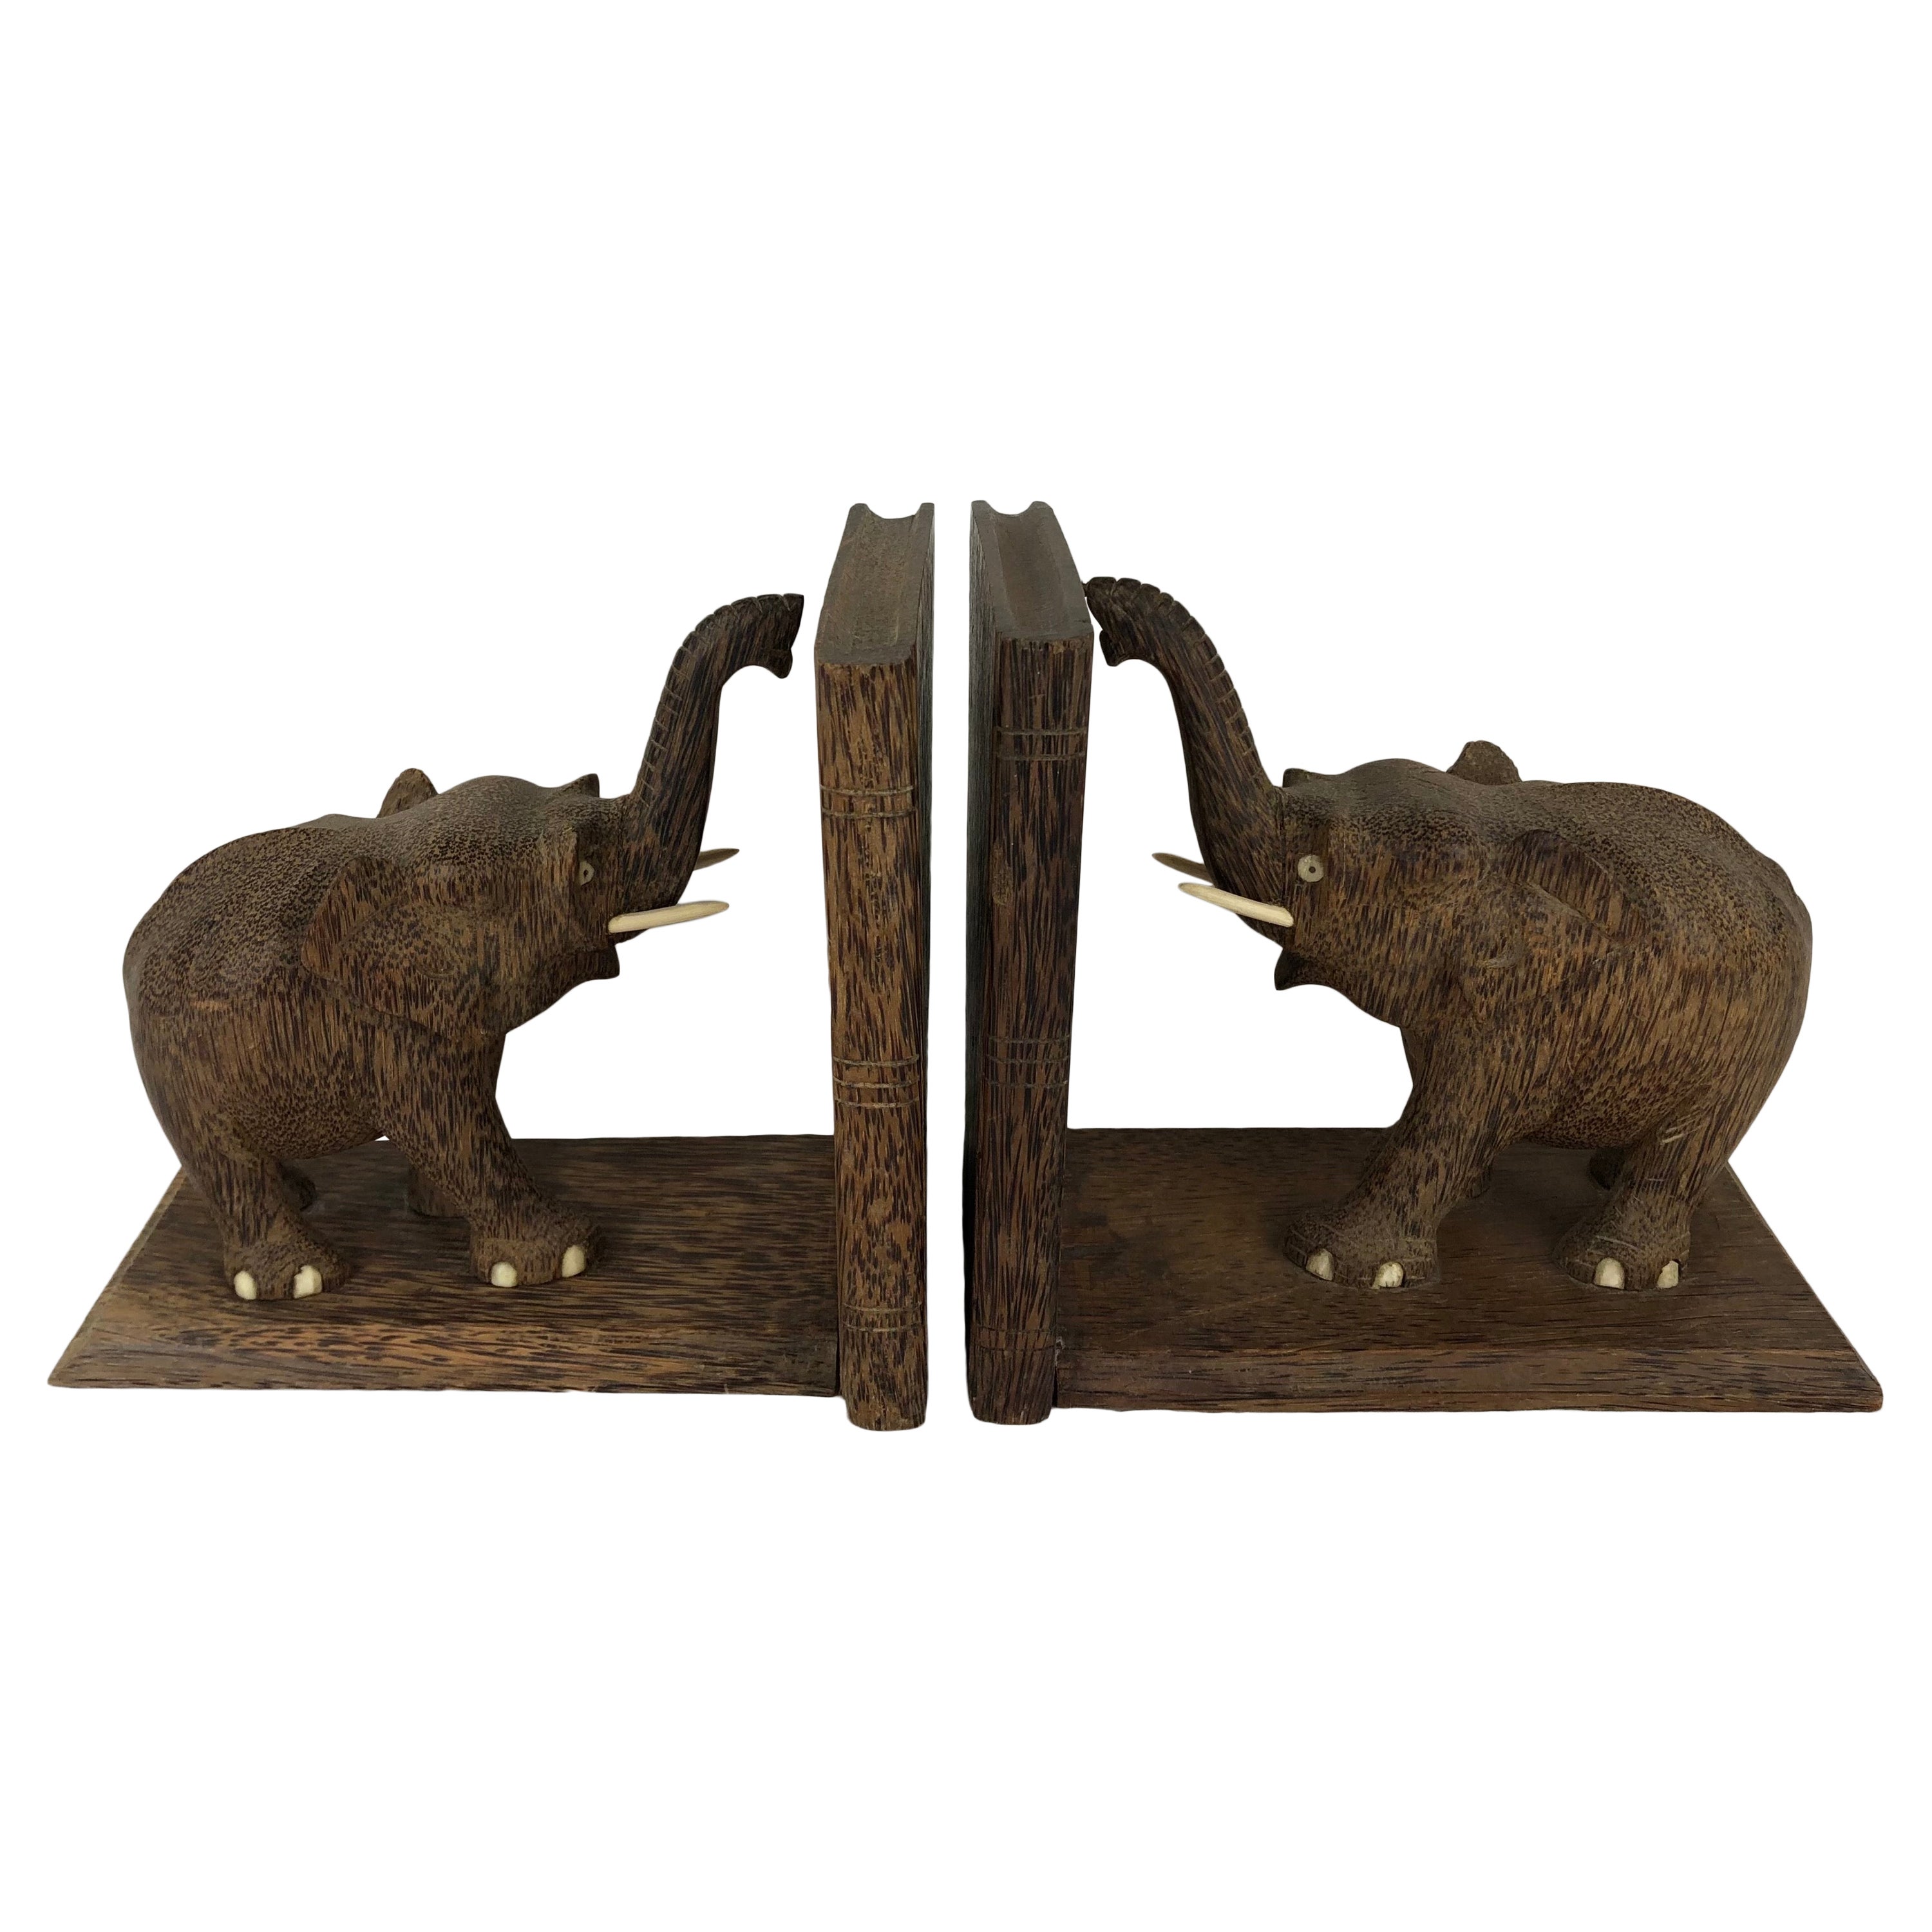 Rare Pair of French Art Deco Hand-Carved Wooden Bookends, Elephants